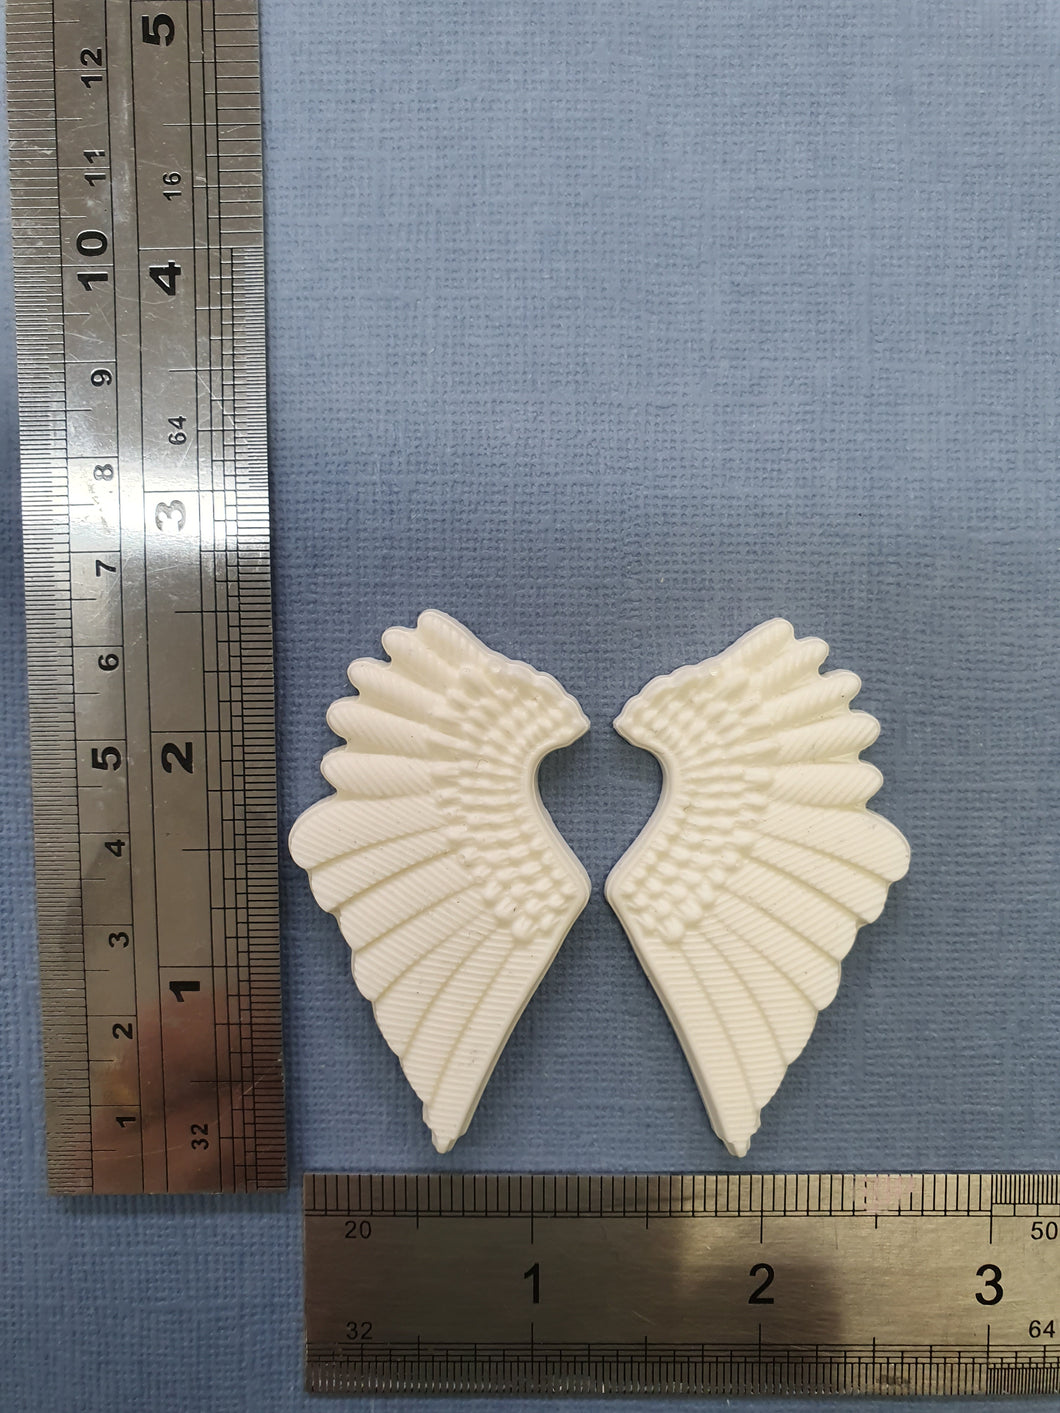 #42 RESIN FORMS - Angel Wings Small 2pc